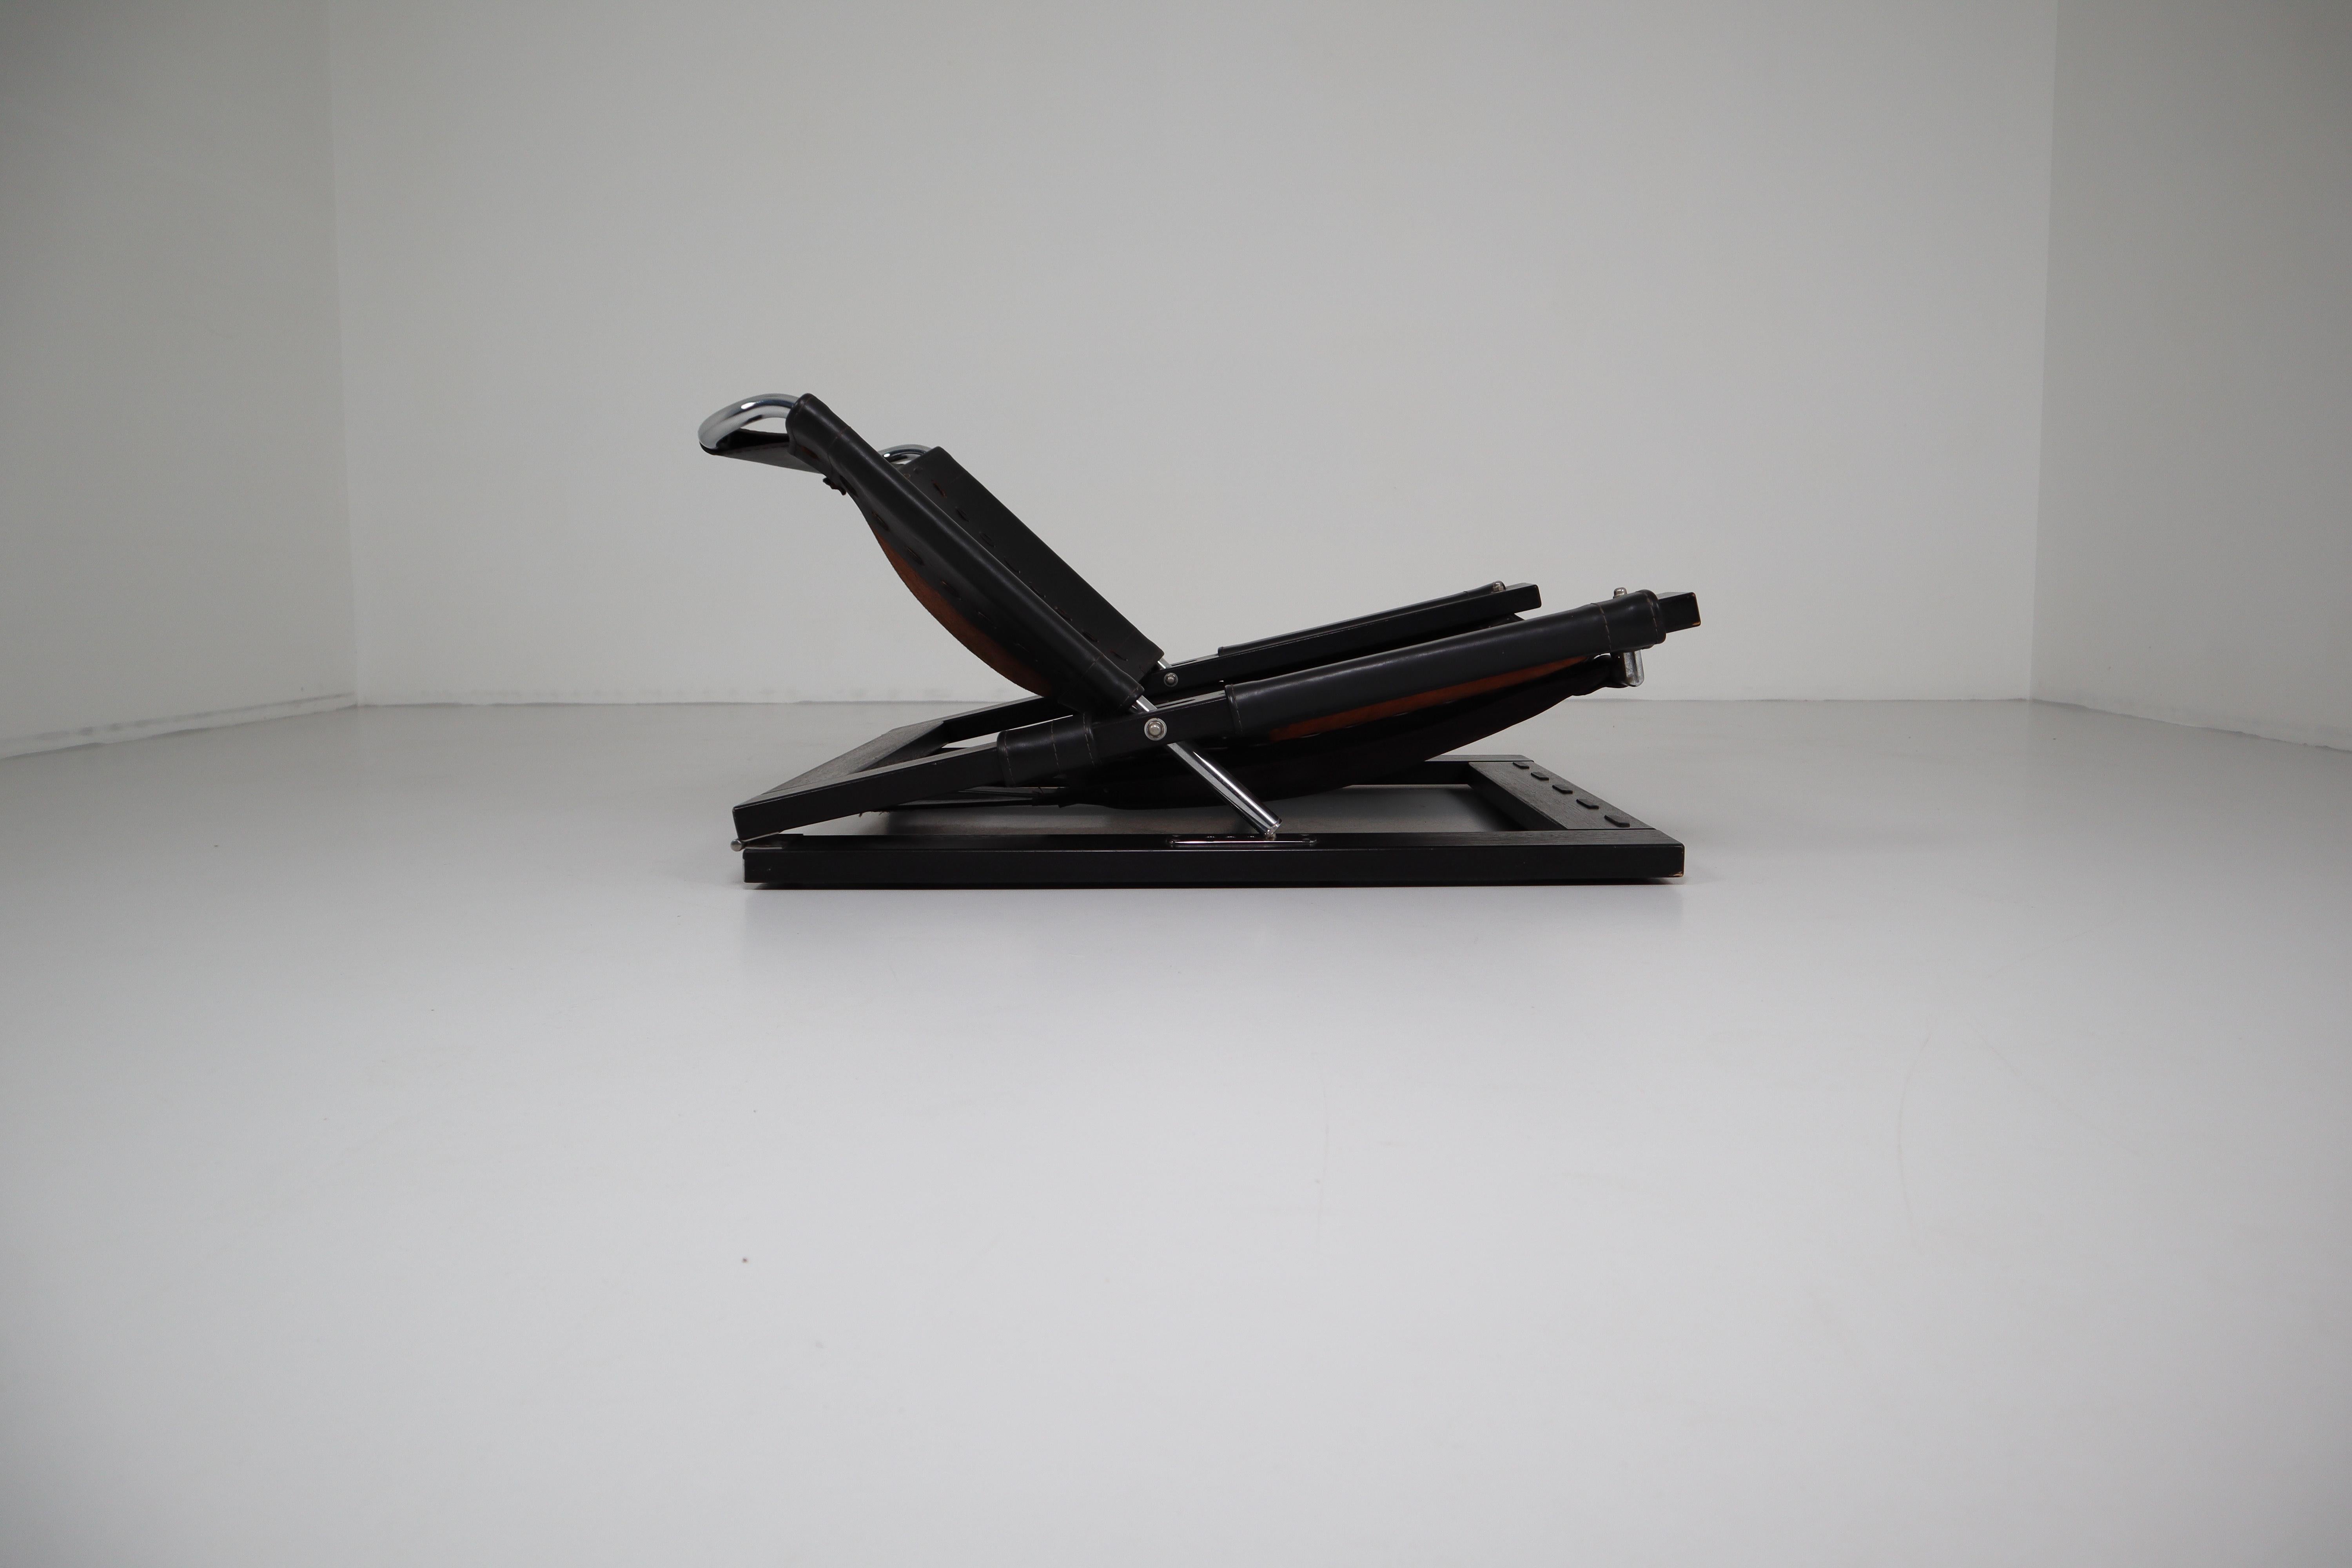 Exceptional and architectural lounge chair designed by Sonja Wasseur, the Netherlands, circa 1970.
She produced her inventive work at her own atelier in Amsterdam for only a short period of time. Her occasional Brutalist lounge chairs are all